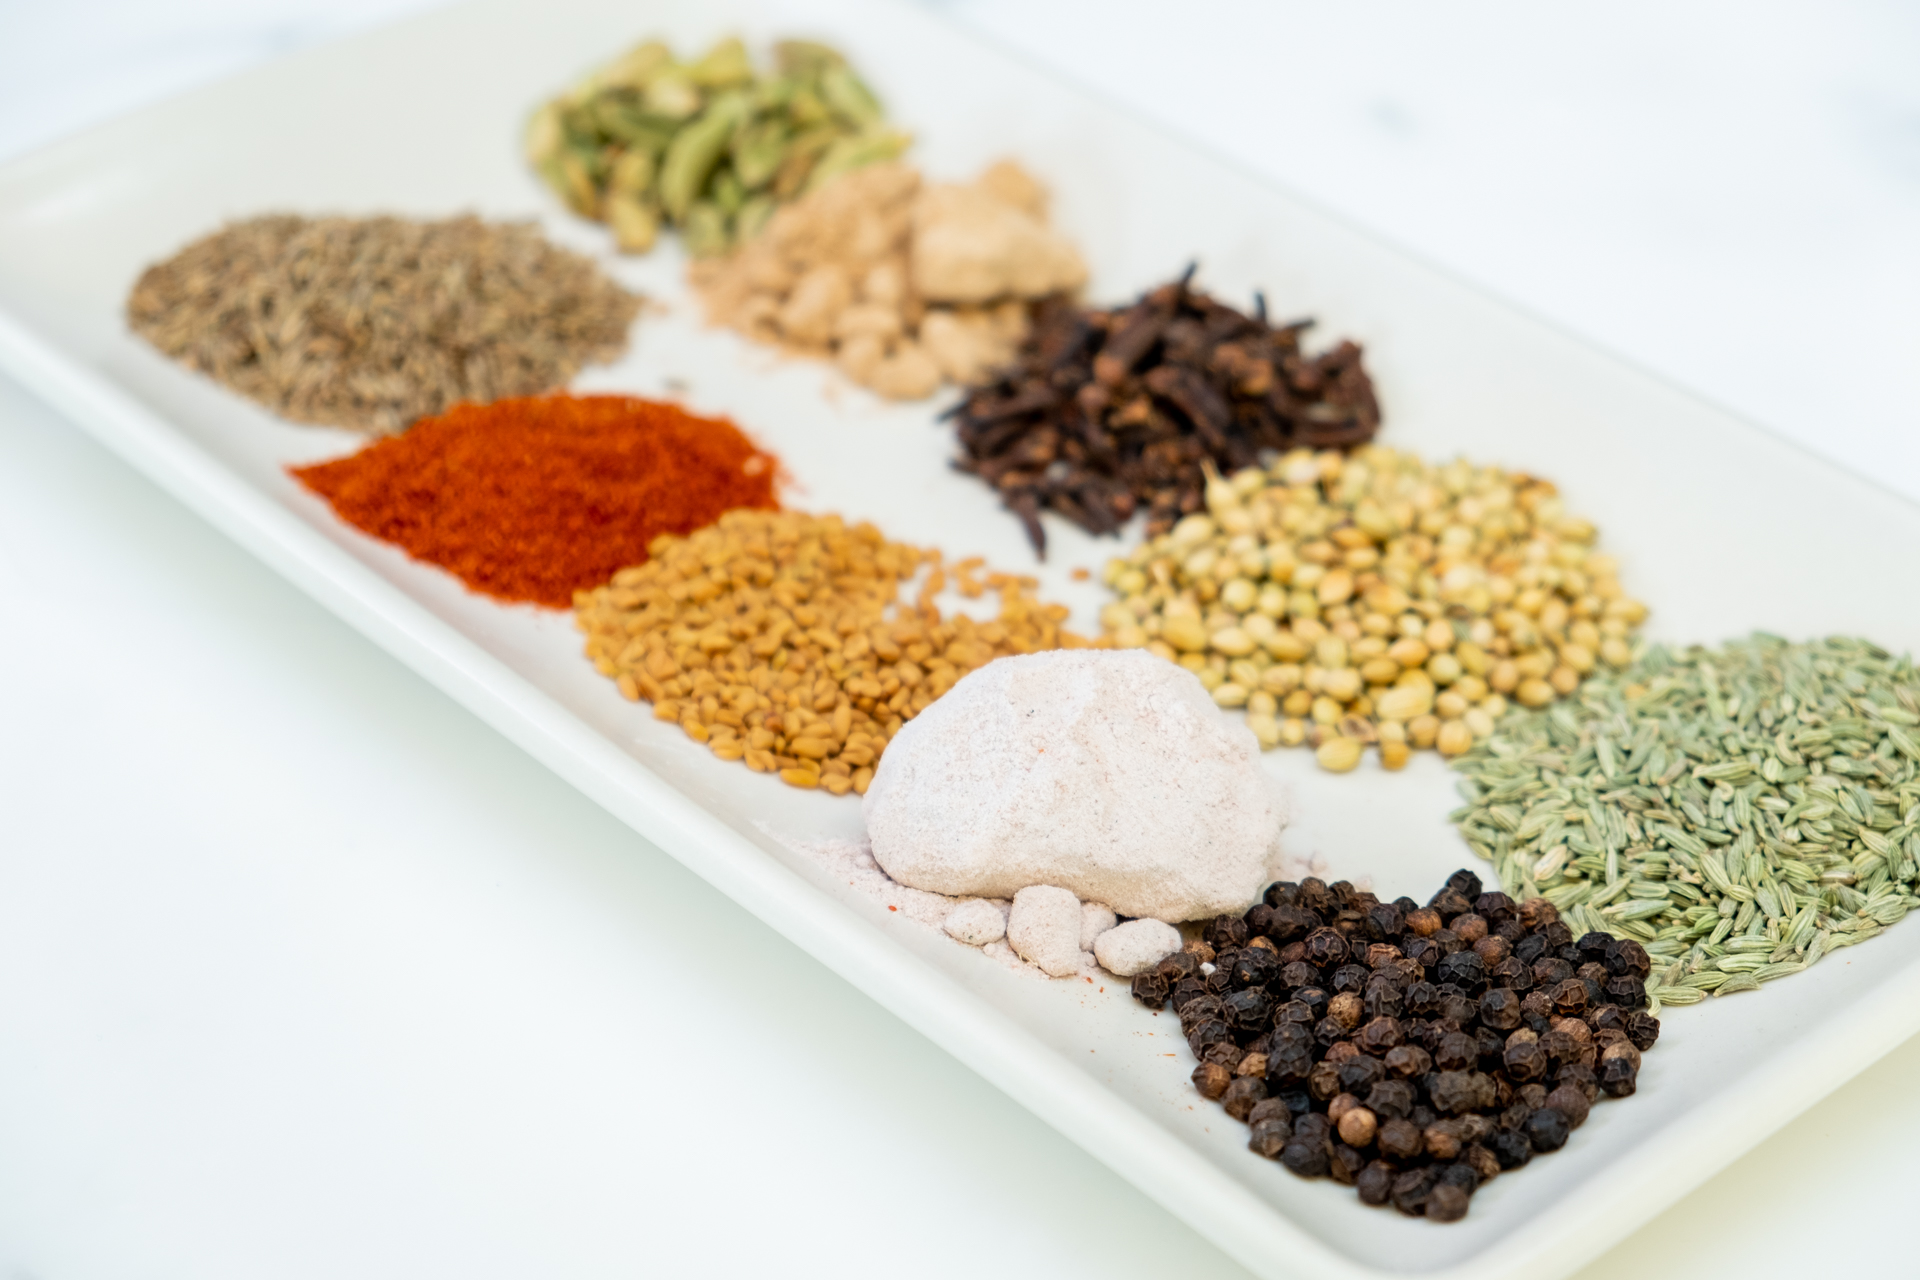 All of the ingredients for Chaat Masala